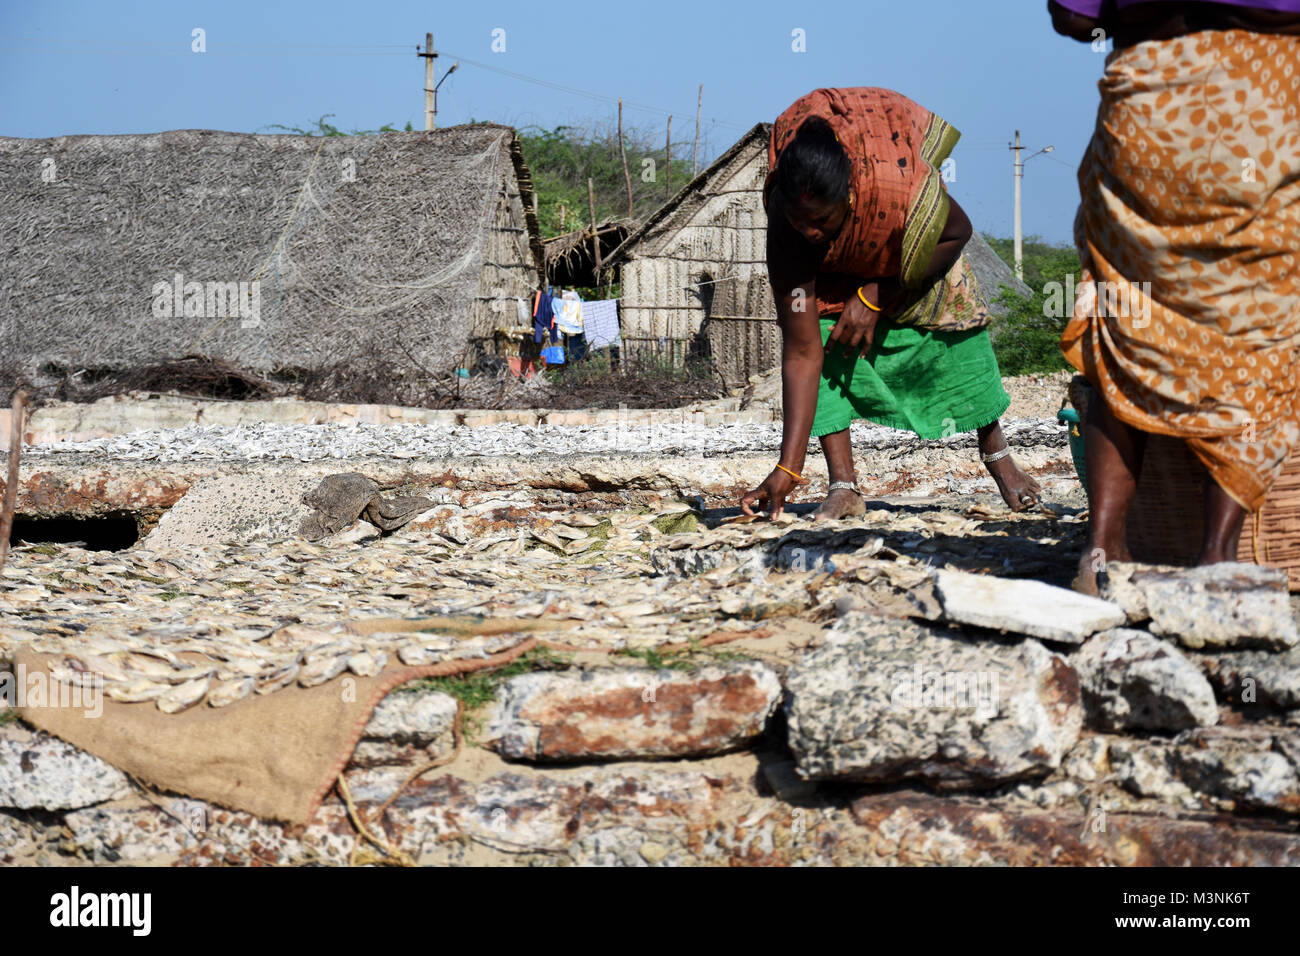 Indian women drying dried fishes in her fishing village. Stock Photo